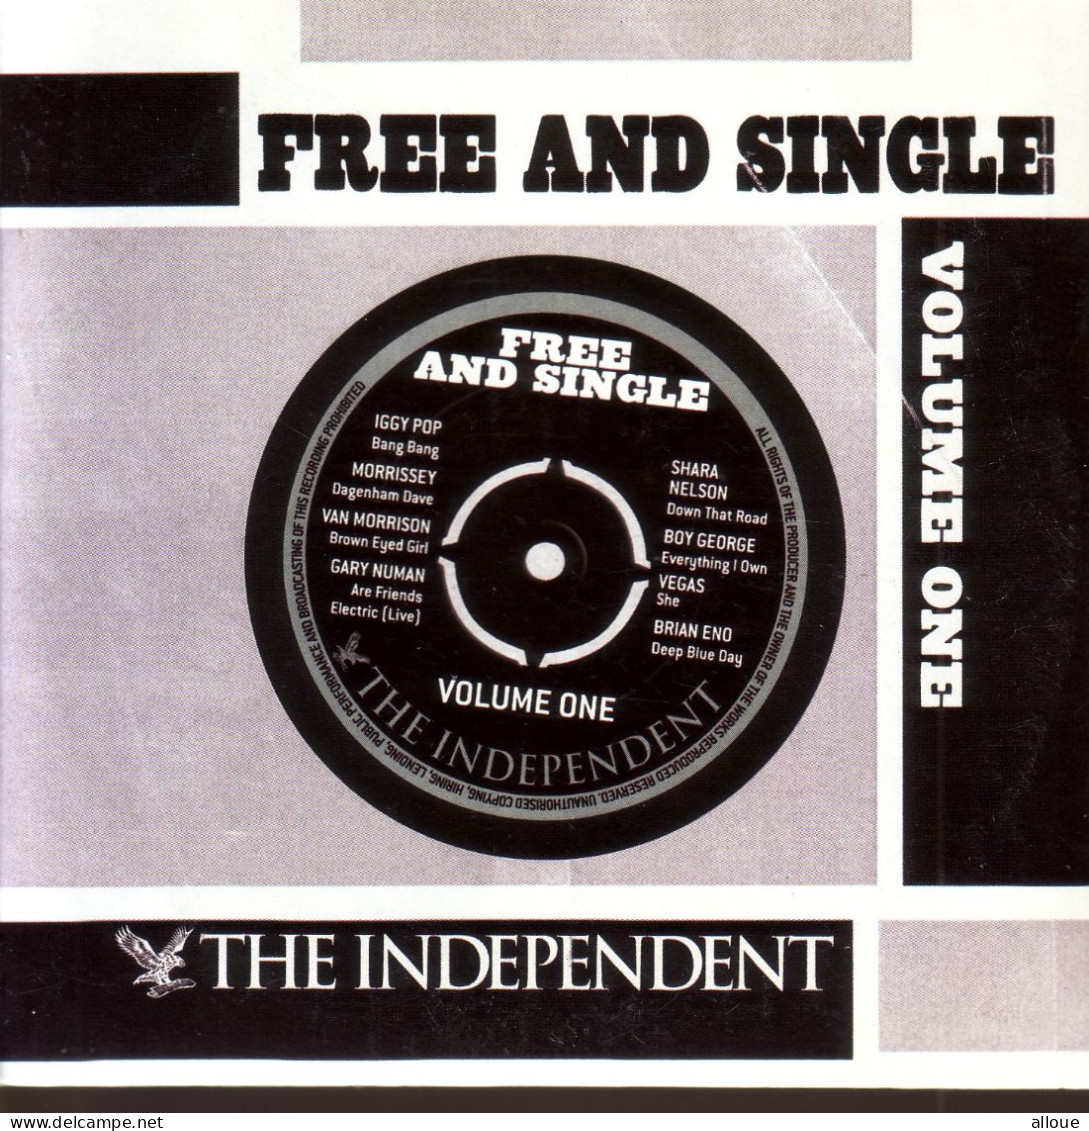 FREE AND SINGLE VOL 1 - CD THE INDEPENDENT - POCHETTE CARTON - IGGY POP-MORRISSEY-VAN MORRISON-GARY NUMAN - Other - English Music